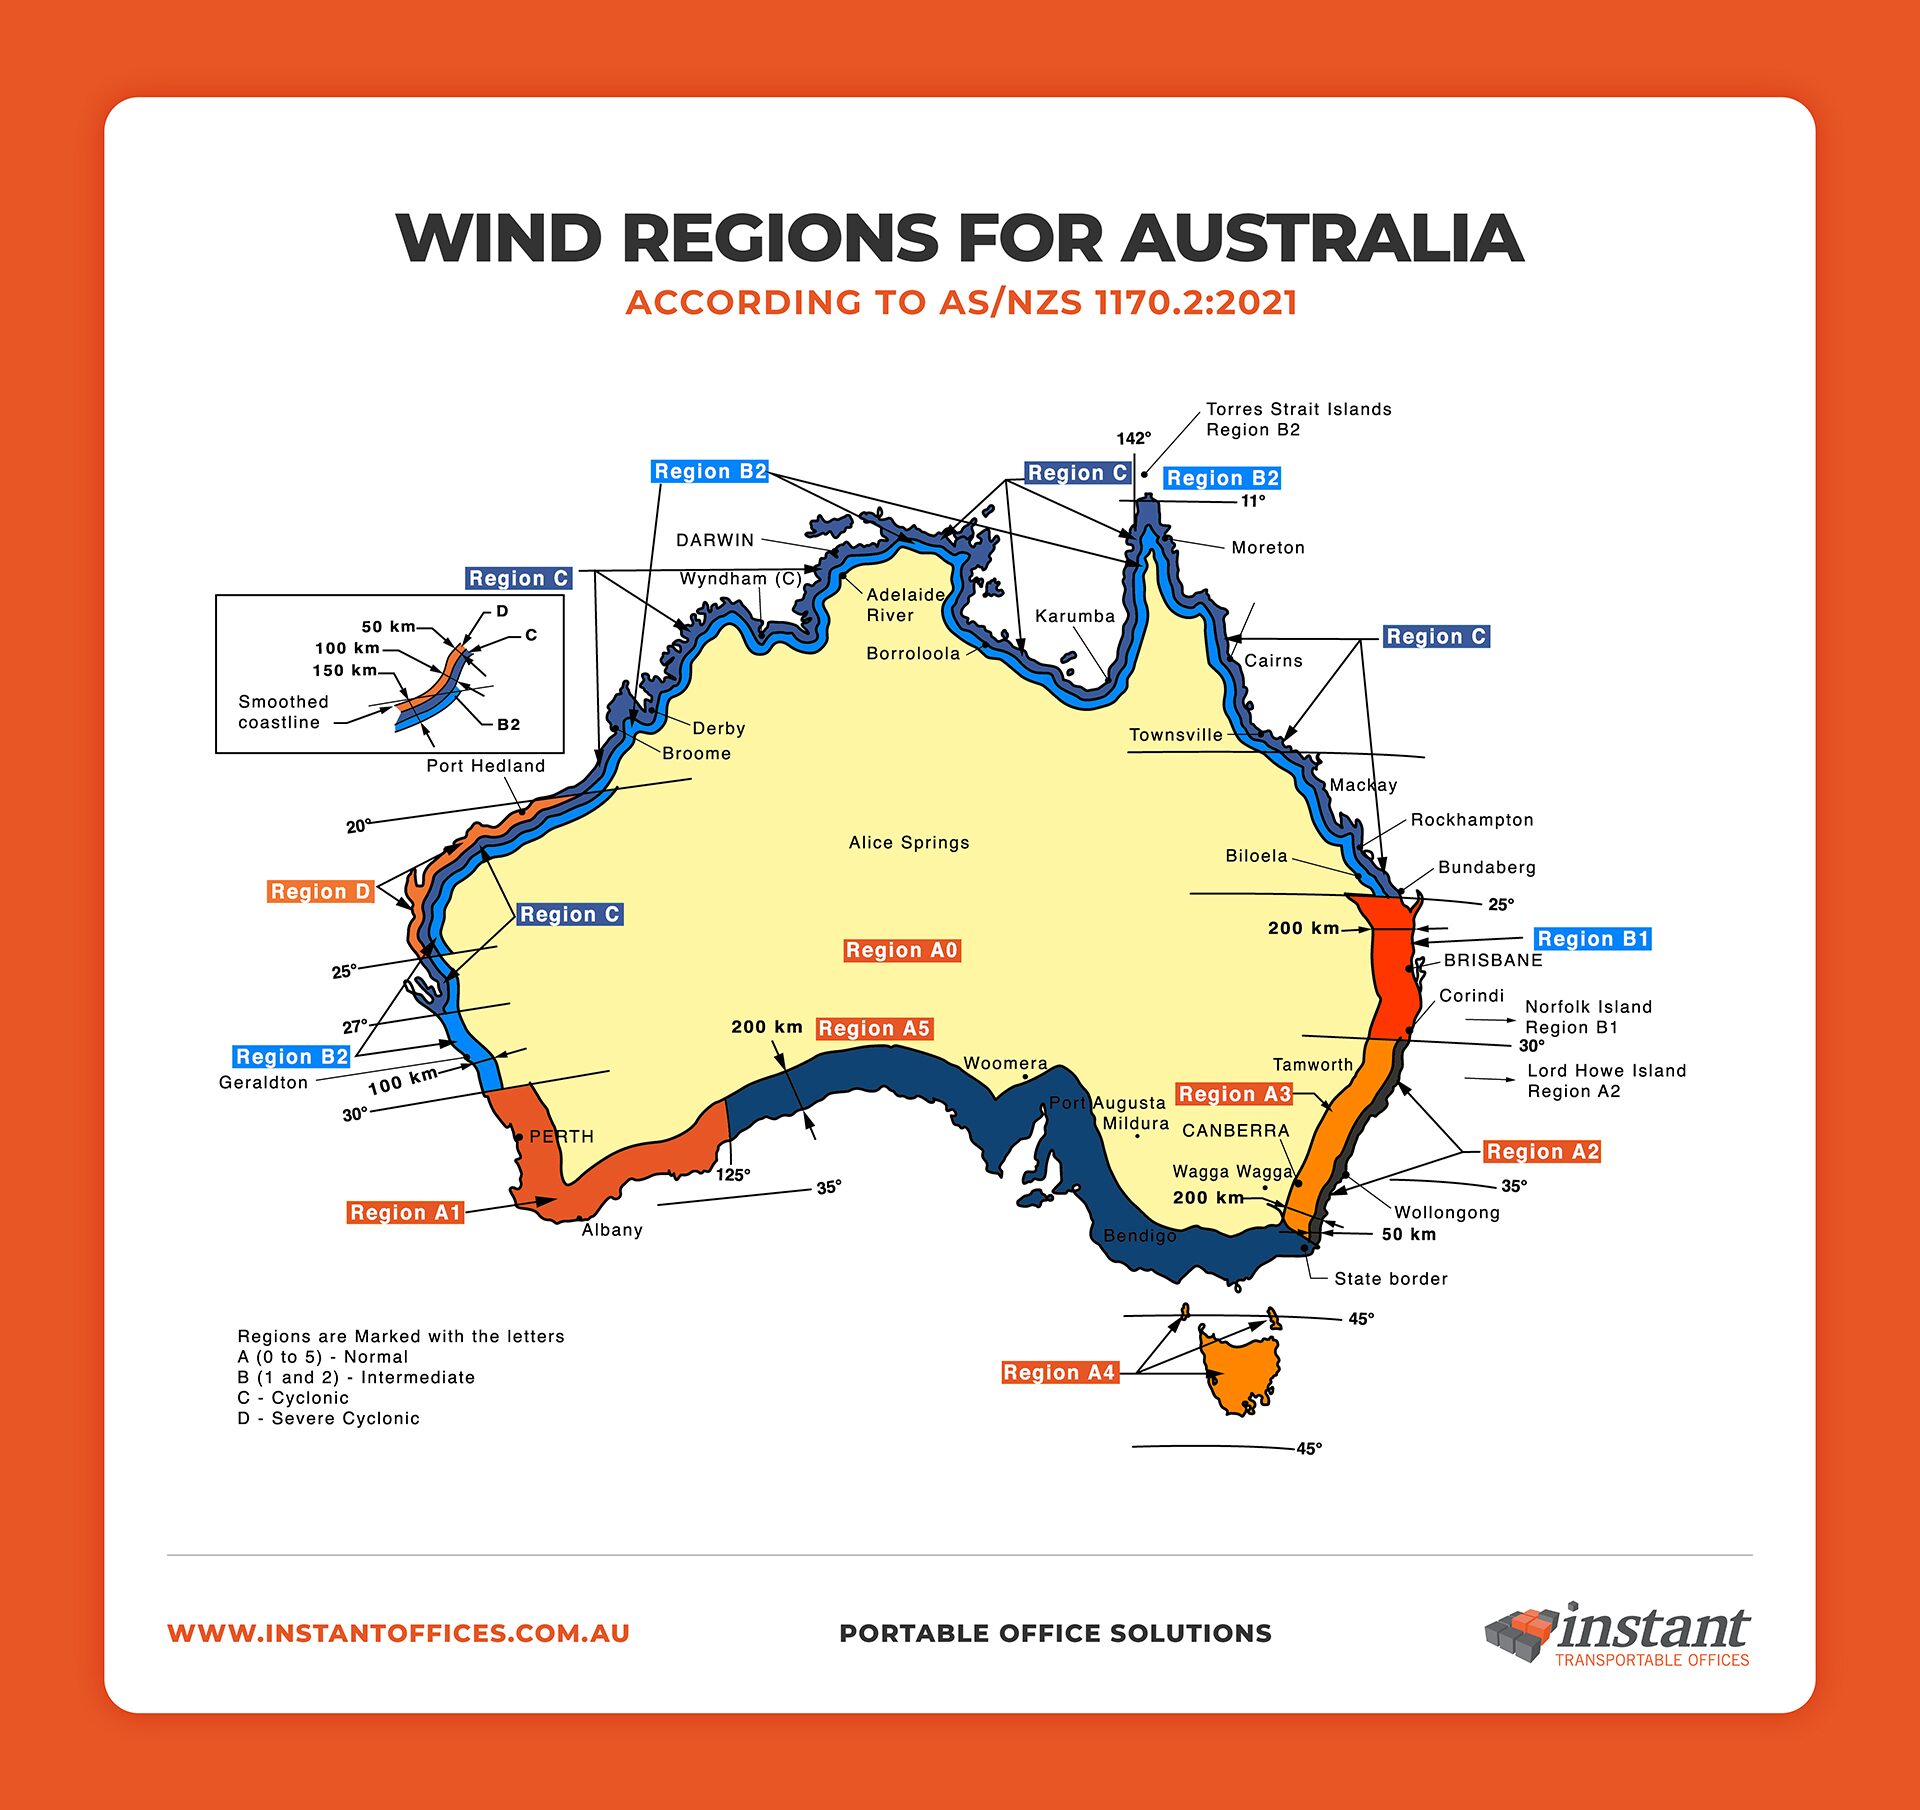 Map of wind regions for Australia according to ASNZS 1170.22021, displaying various cyclonic and non-cyclonic zones across the country.